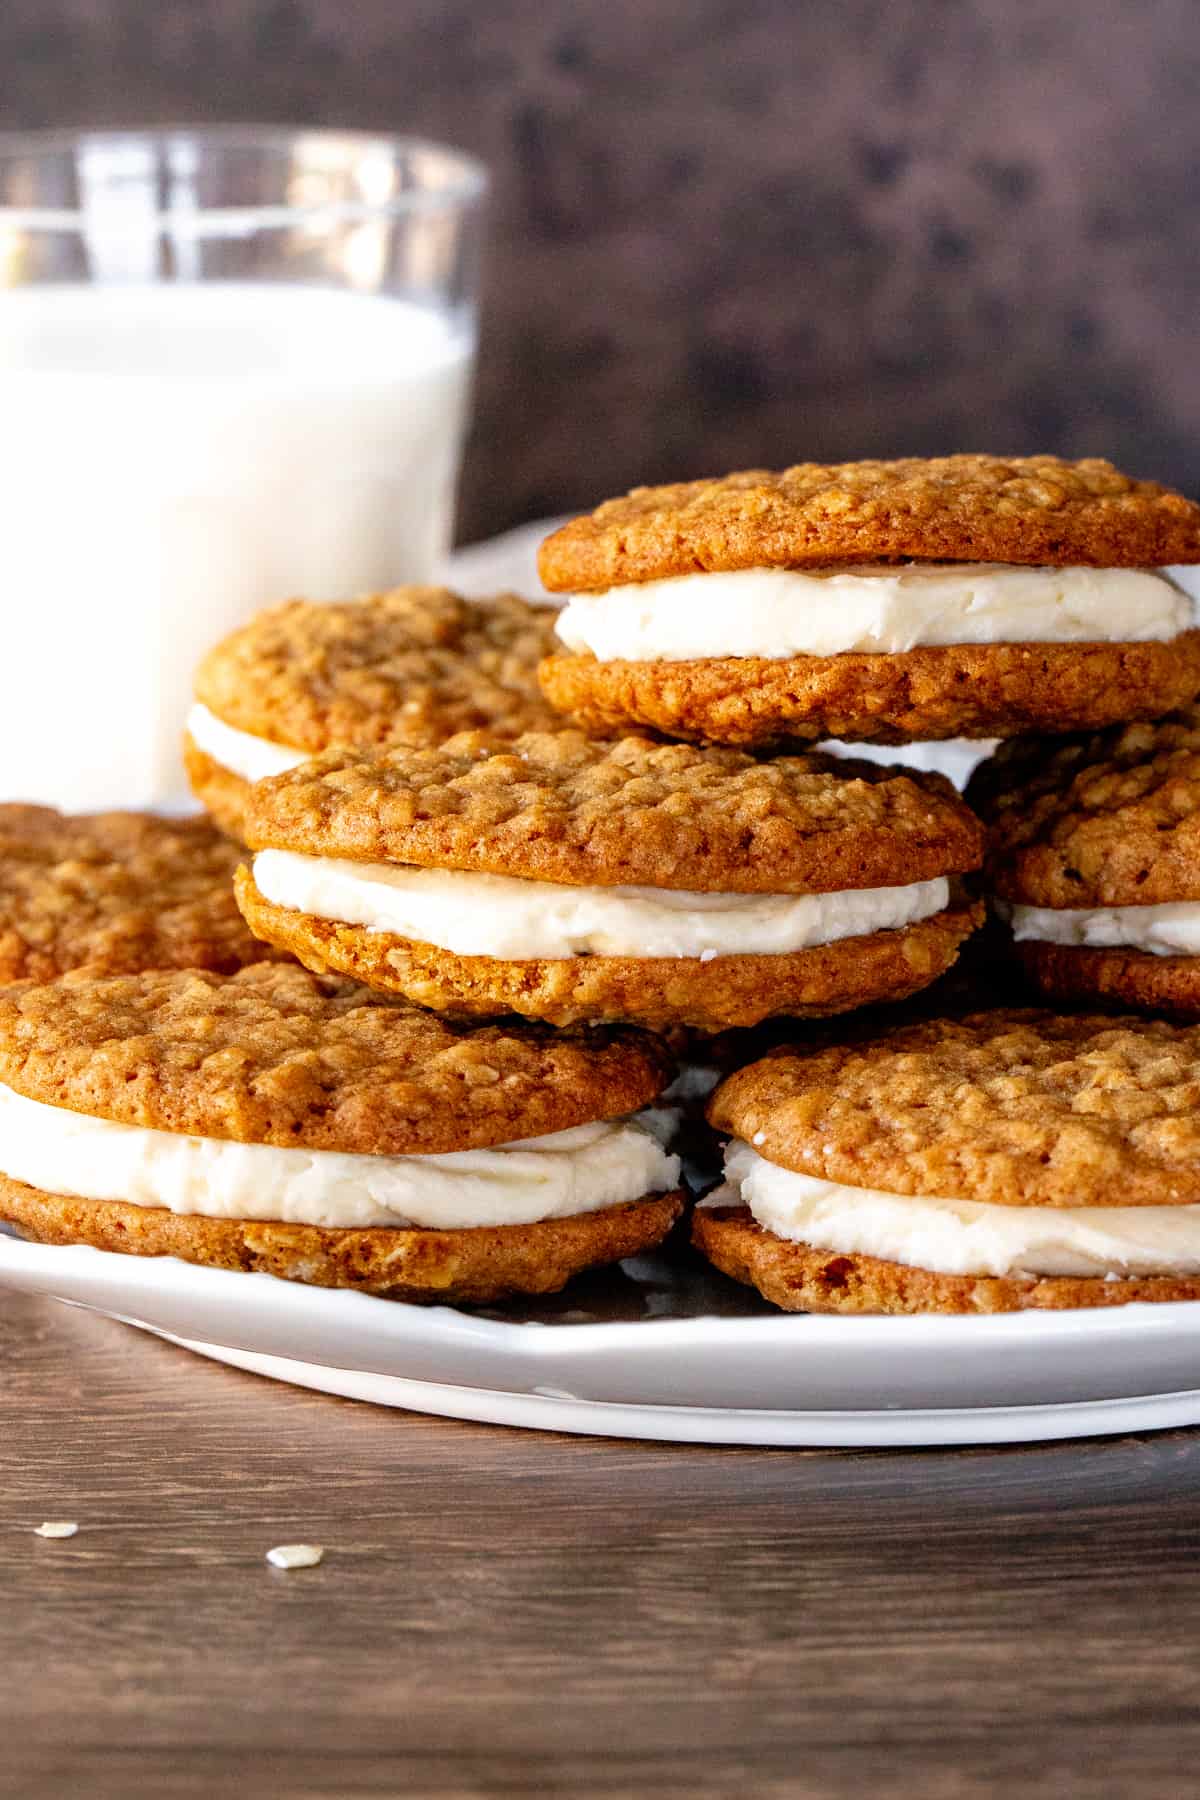 Plate of oatmeal sandwich cookies with vanilla frosting